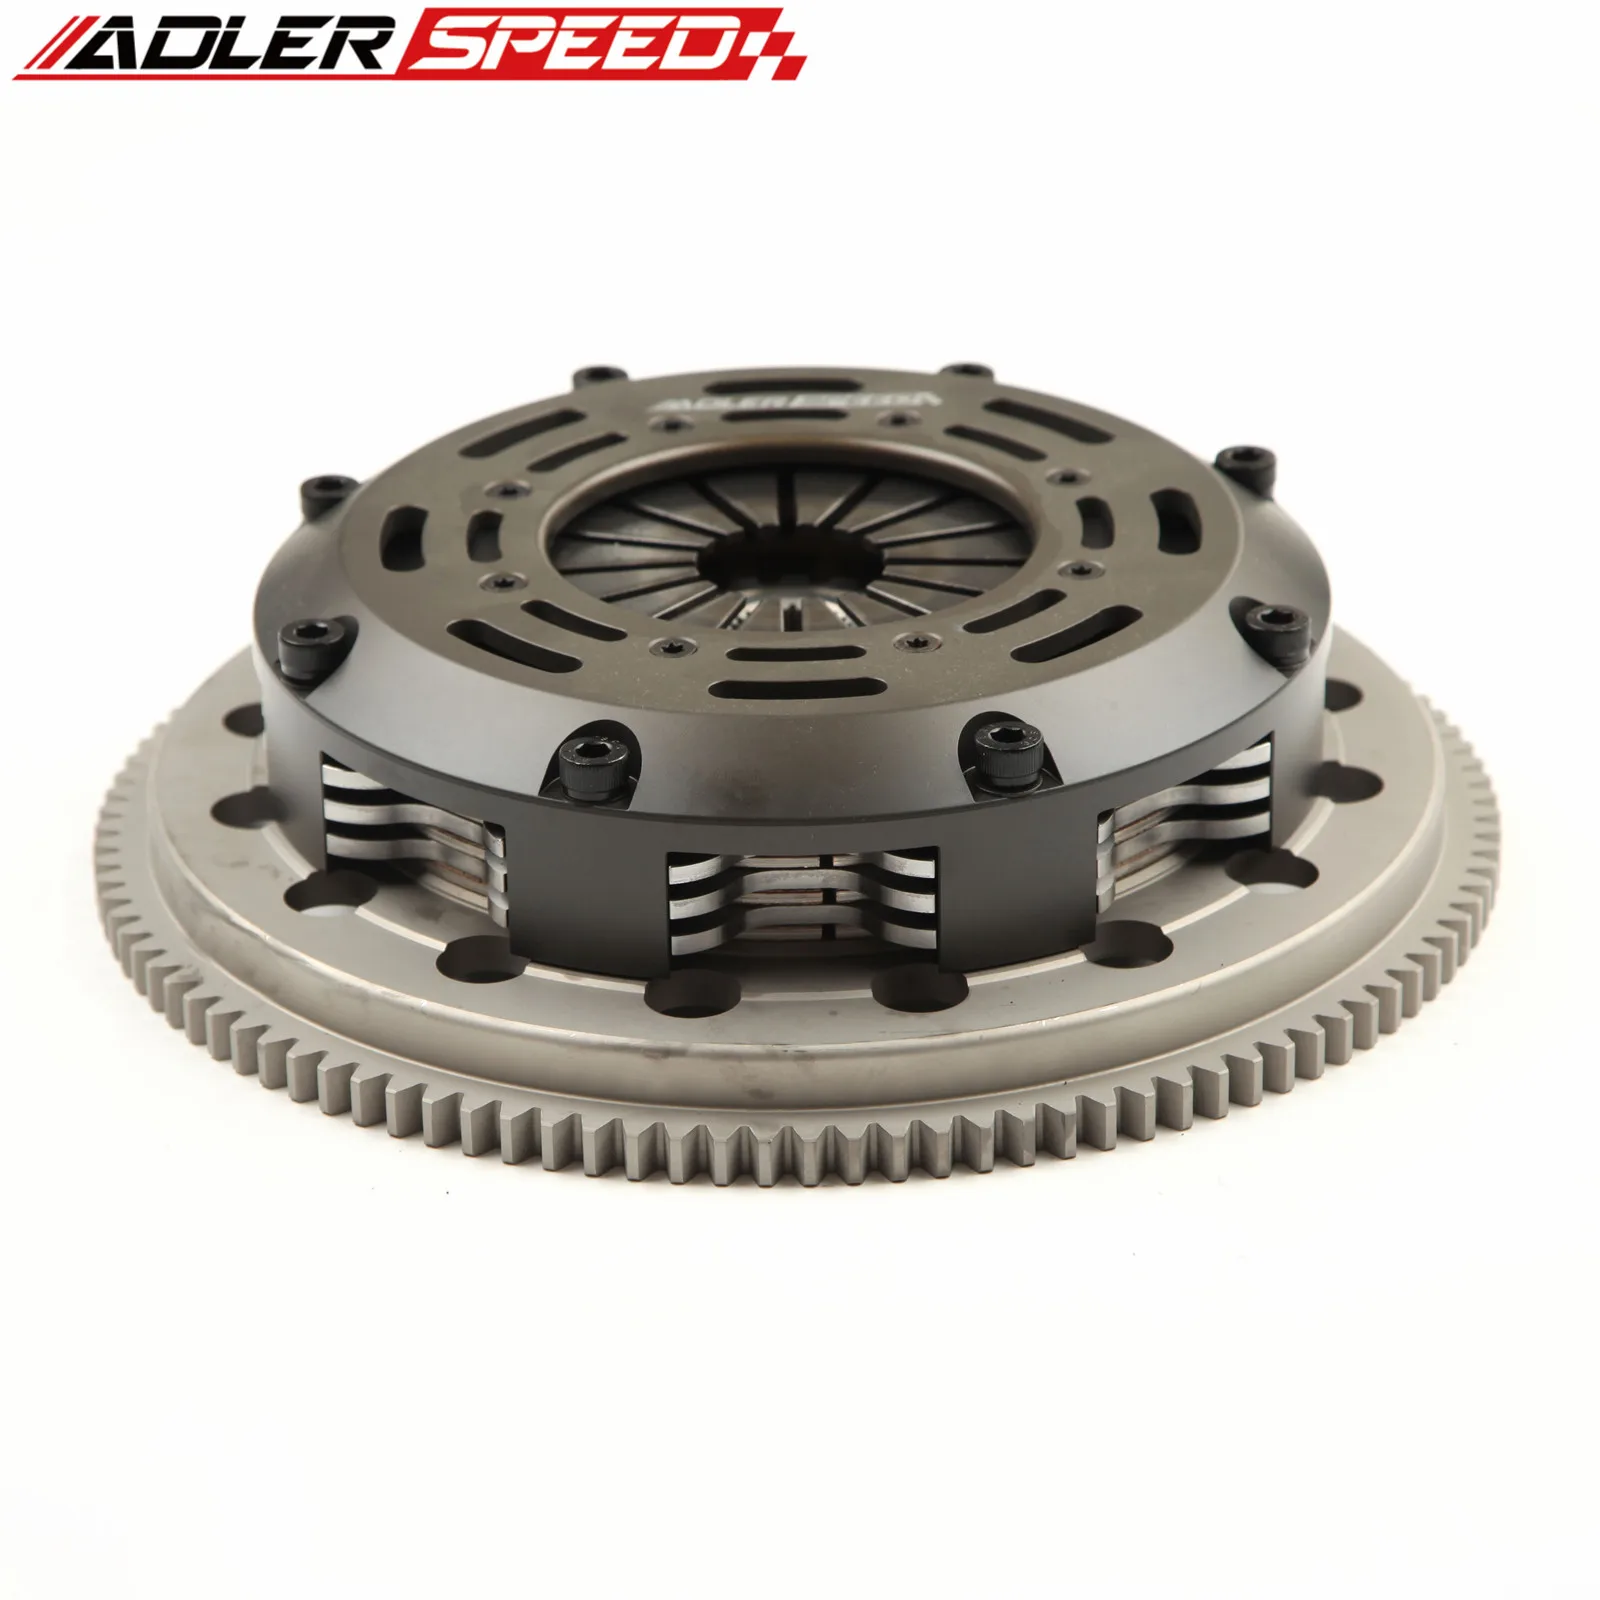 

ADLERSPEED Racing Triple Disc Clutch For 1989 - 1998 Nissan 240SX with 2.0L Turbo SR20DET